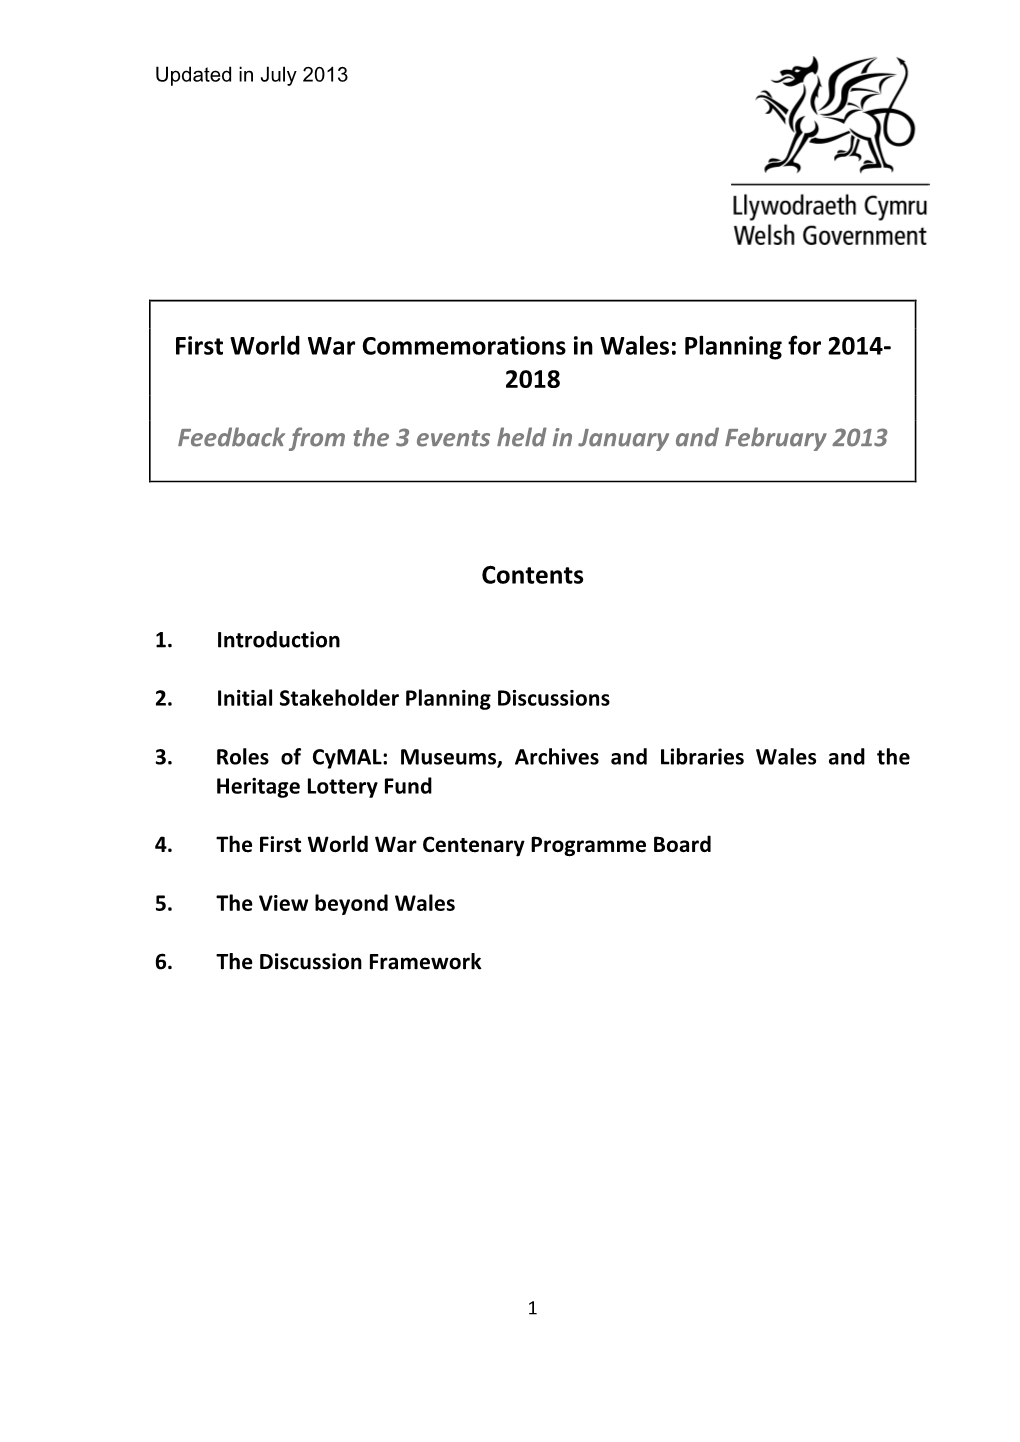 First World War Commemorations in Wales: Planning for 2014- 2018